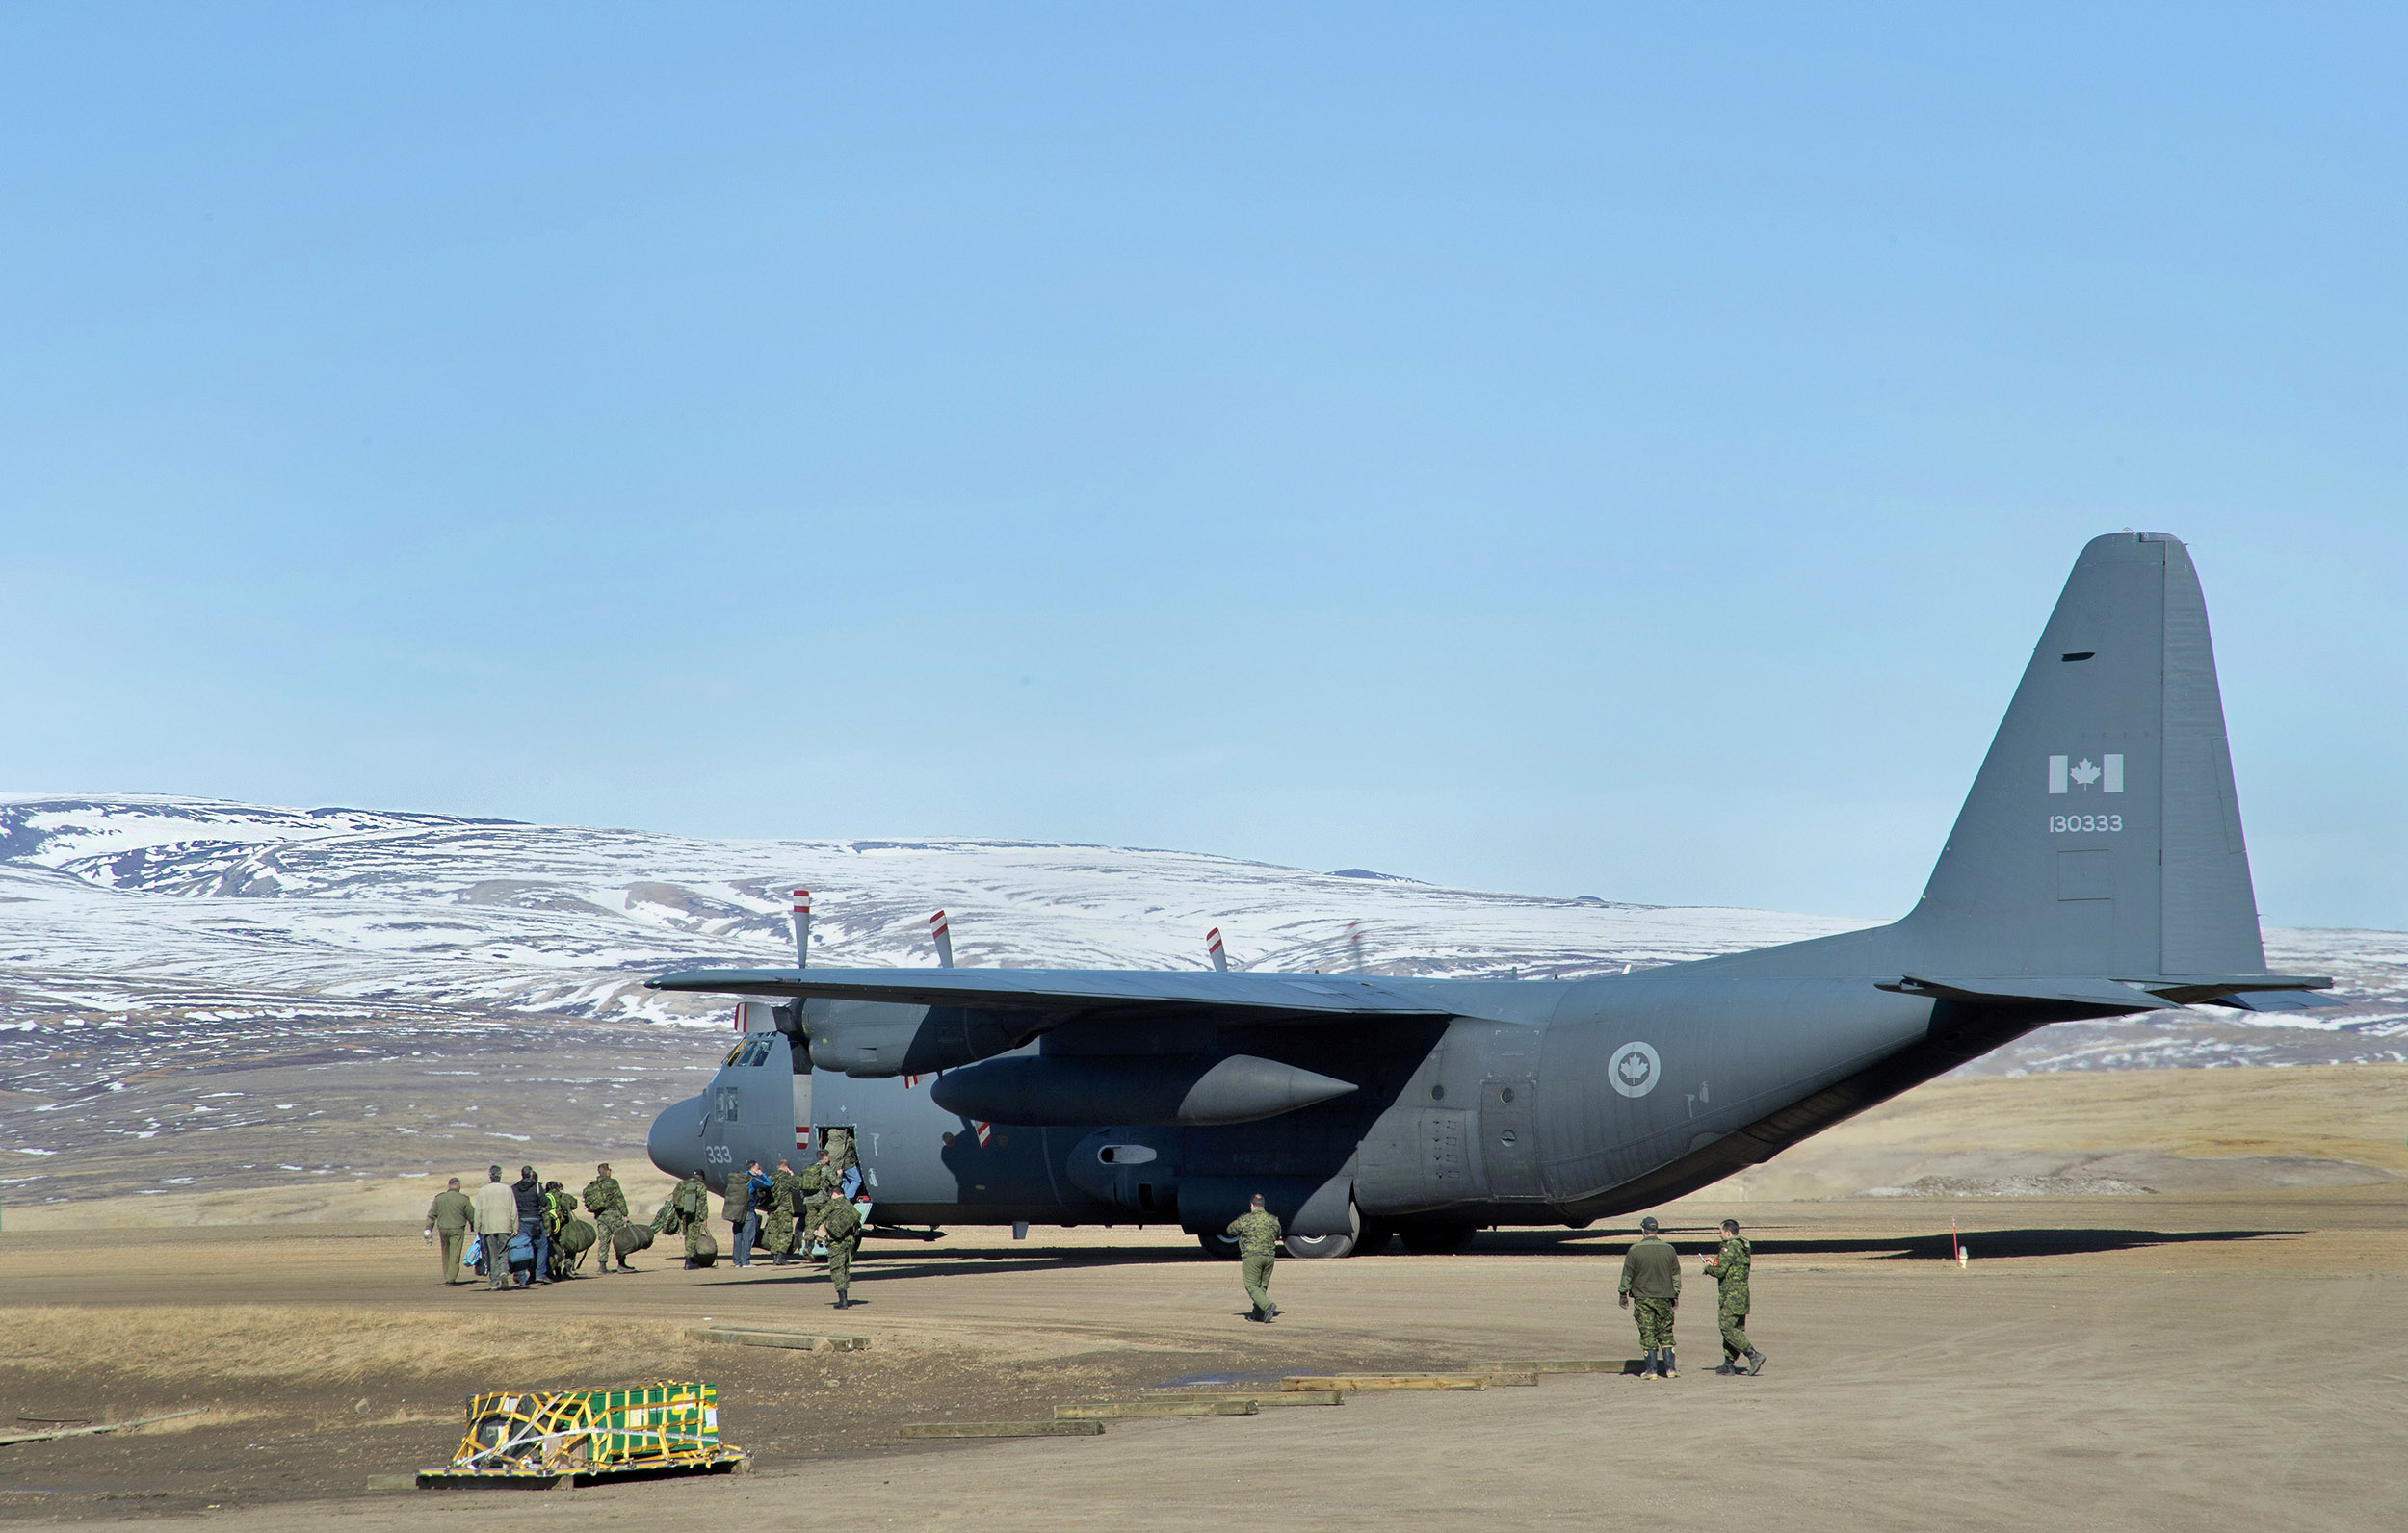 Canadian Armed Forces members board a CC-130 Hercules aircraft from 426 Squadron, at Canadian Forces Station Alert en route to Eureka, Nunavut during Operation Nevus 2016, on June 14, 2016. PHOTO: Petty Officer 2nd Class Belinda Groves, YK-2016-040-002